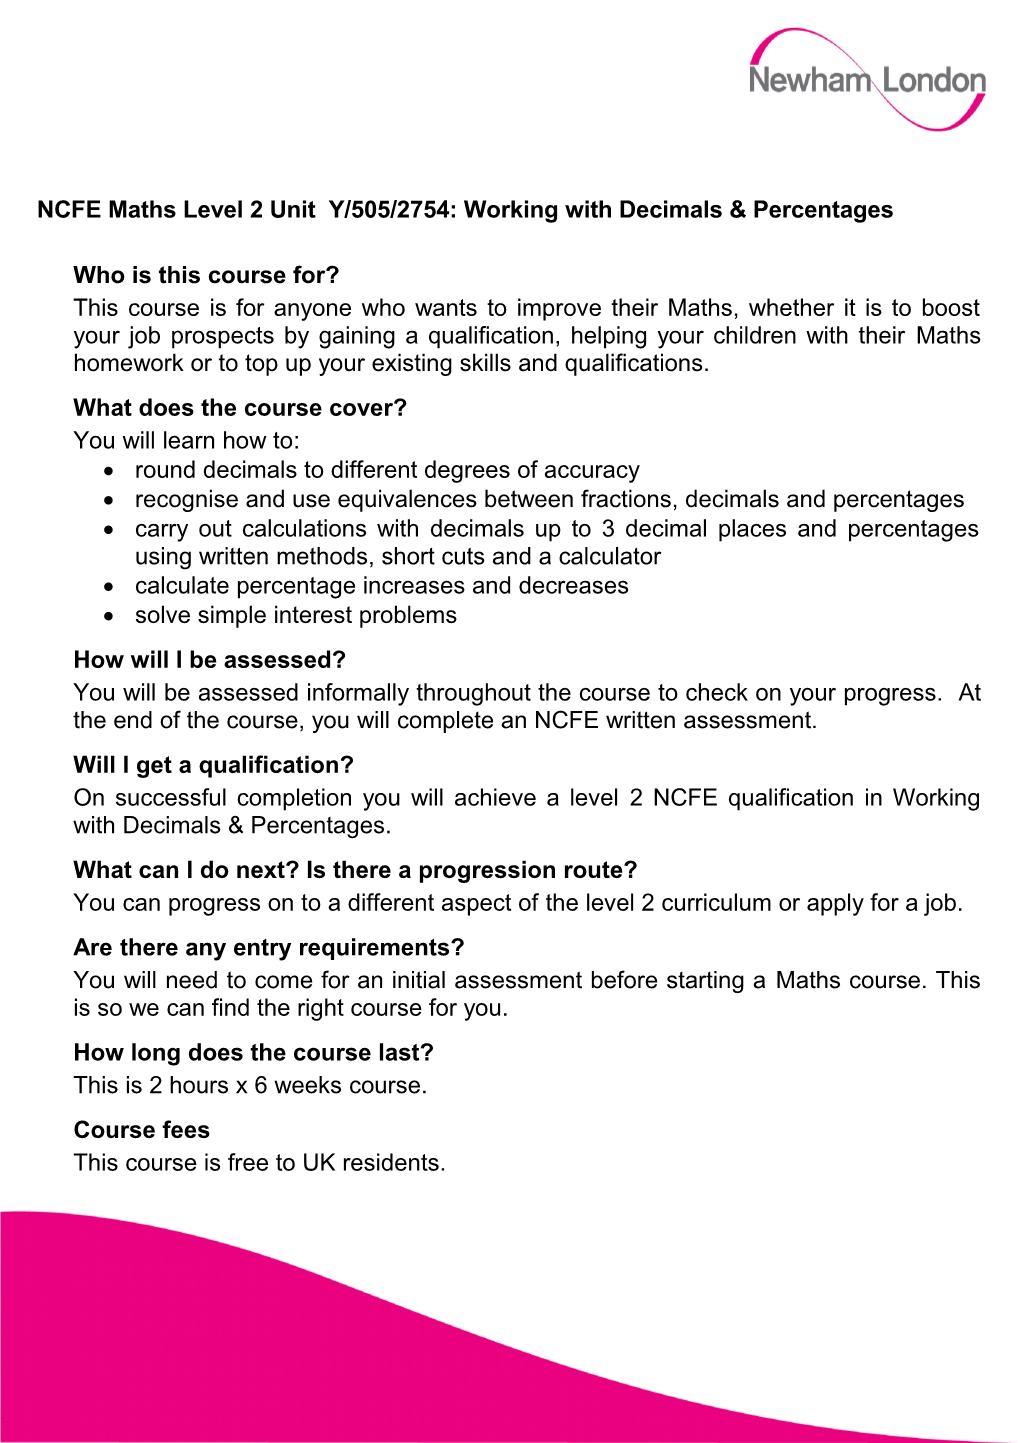 Newham Adult Learning Service - Course Information Sheet s2